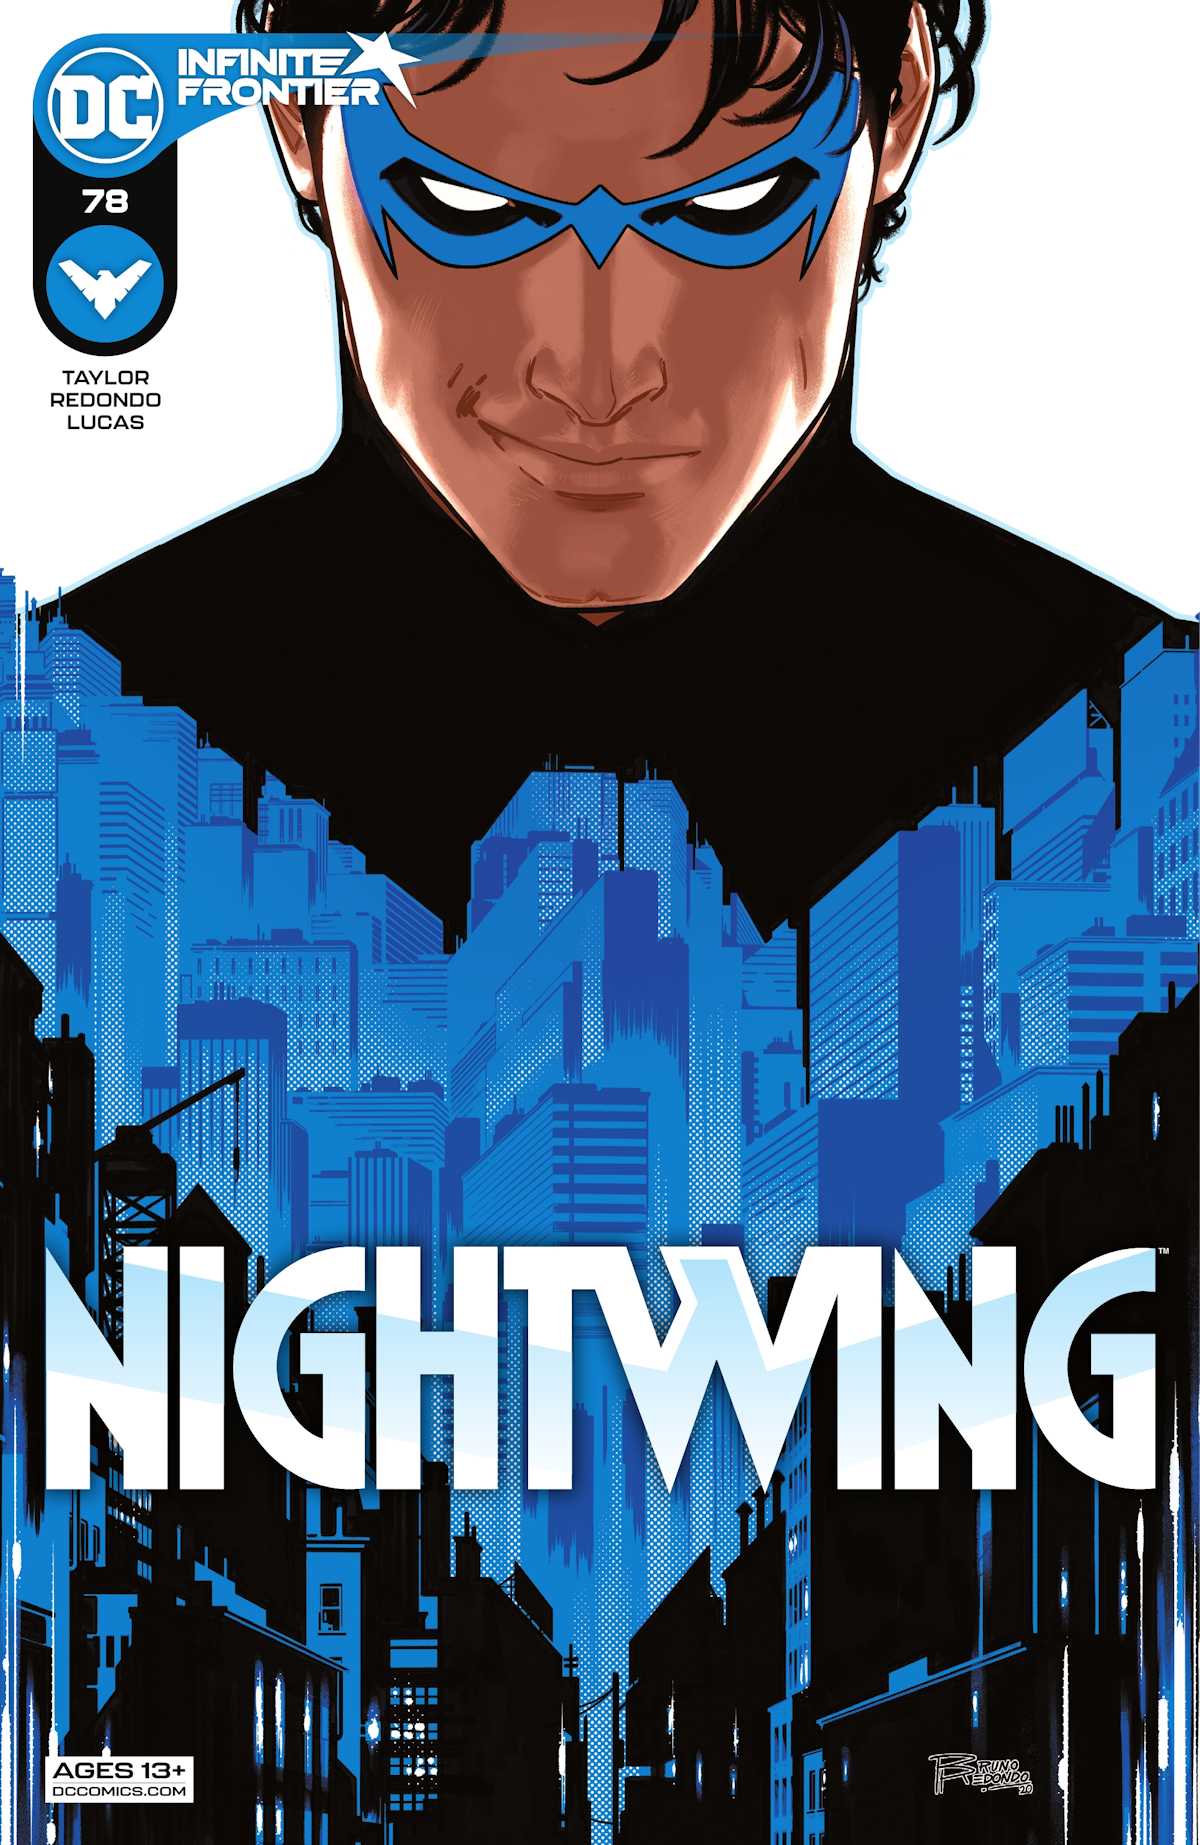 Nightwing Vol. 4 78 (Cover A)